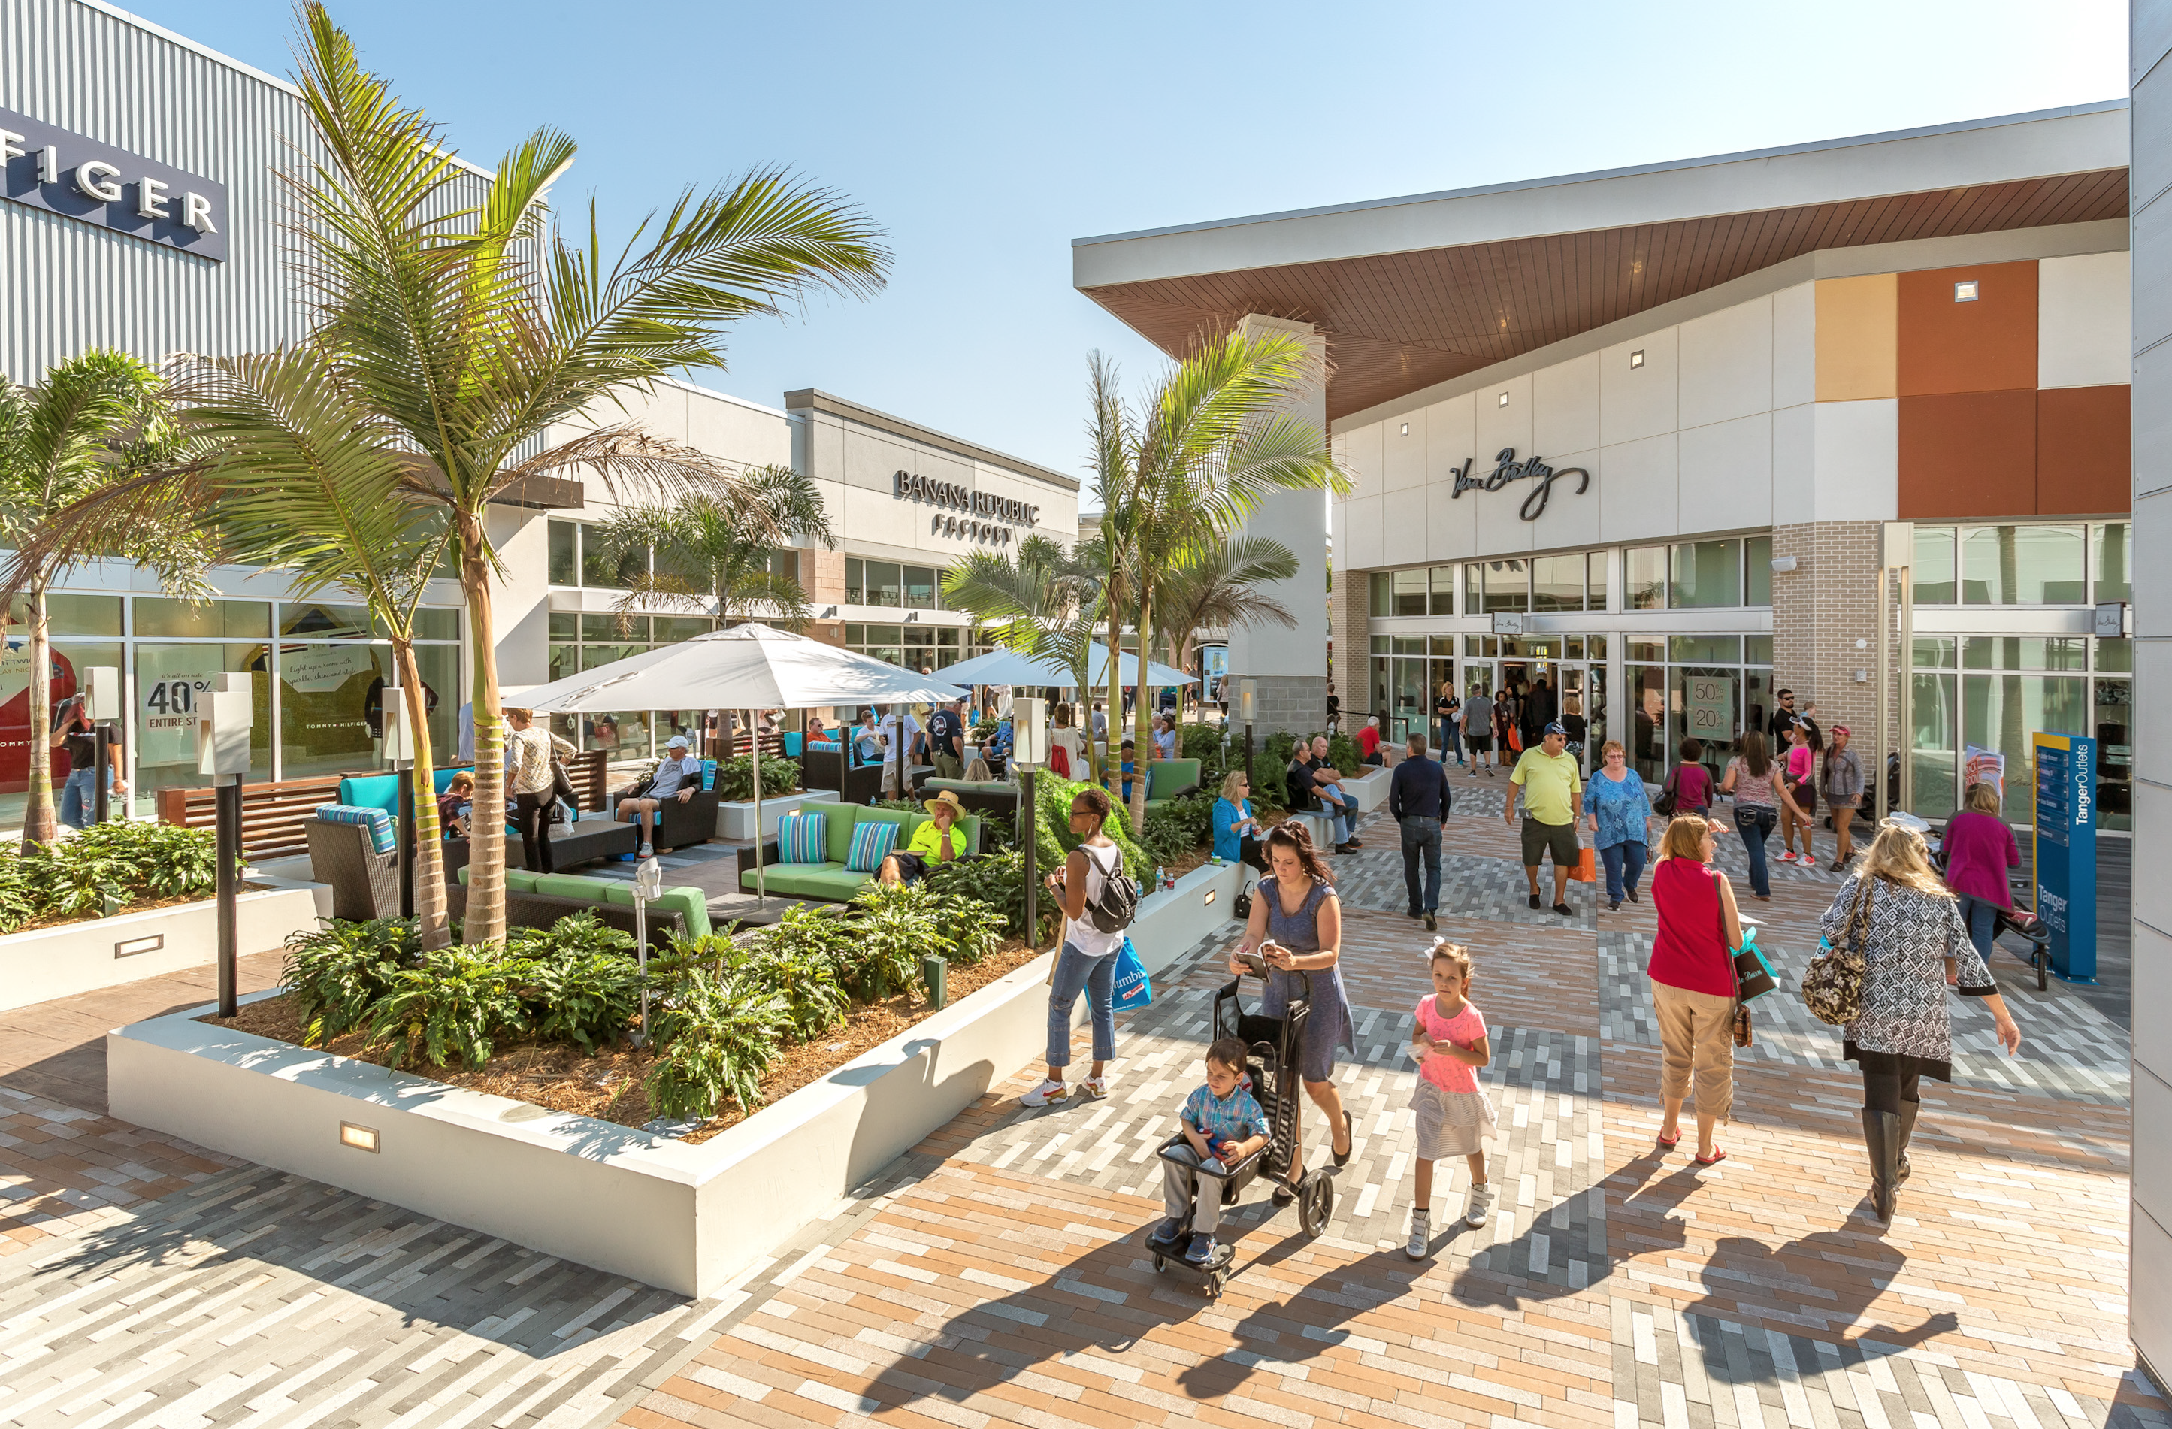 Tanger Outlets Daytona Beach: Your Guide to Outdoor Shopping in Style